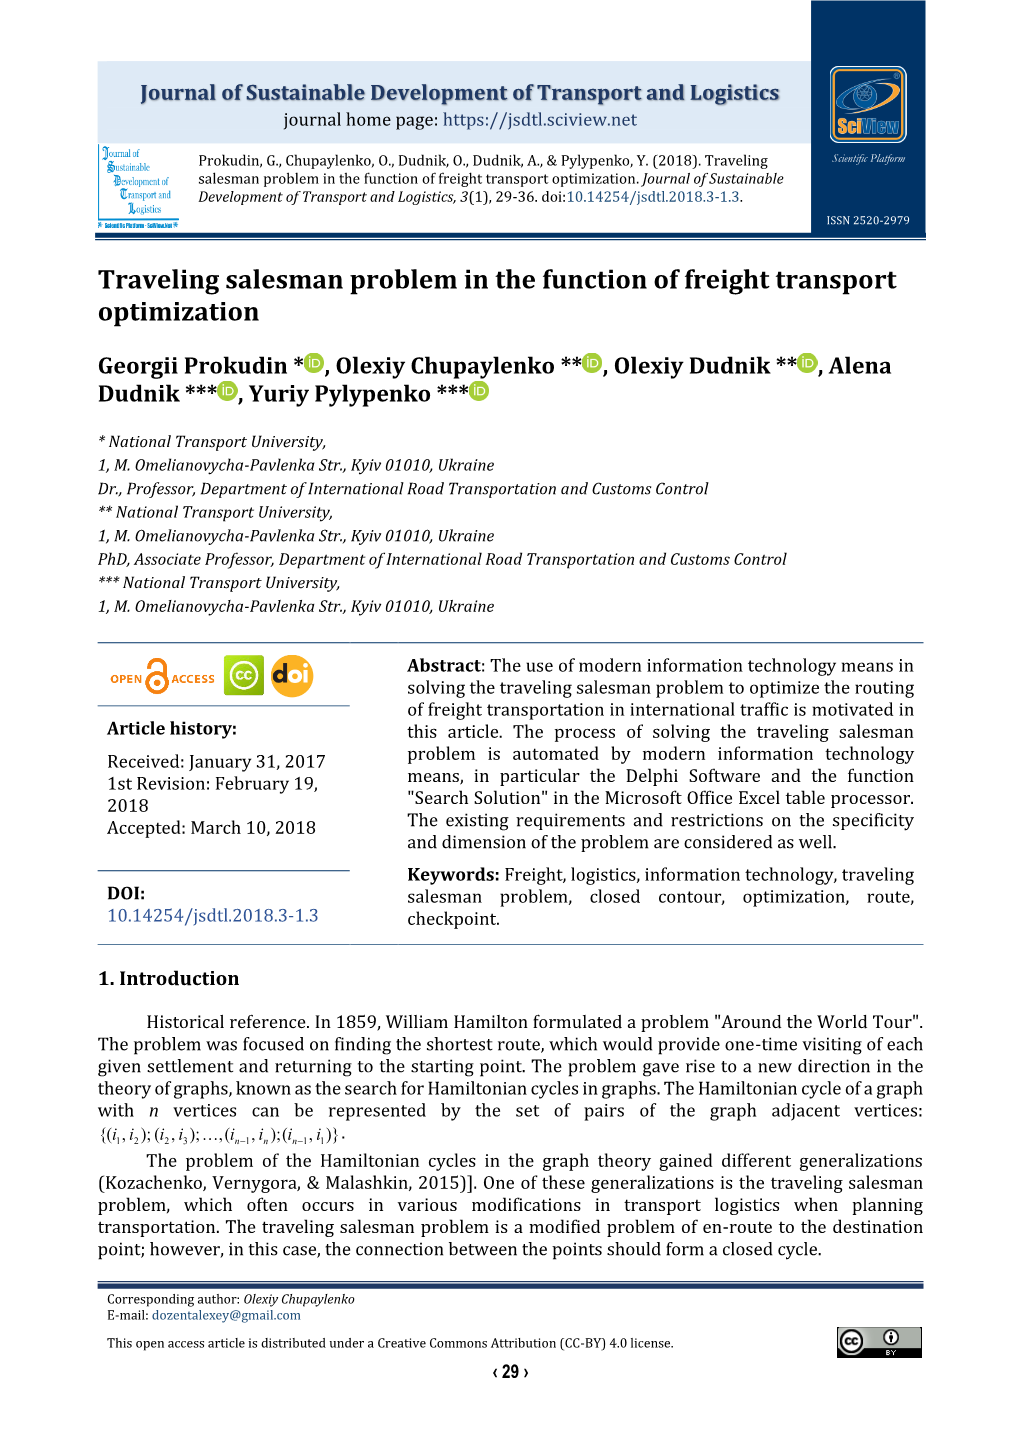 Traveling Salesman Problem in the Function of Freight Transport Optimization